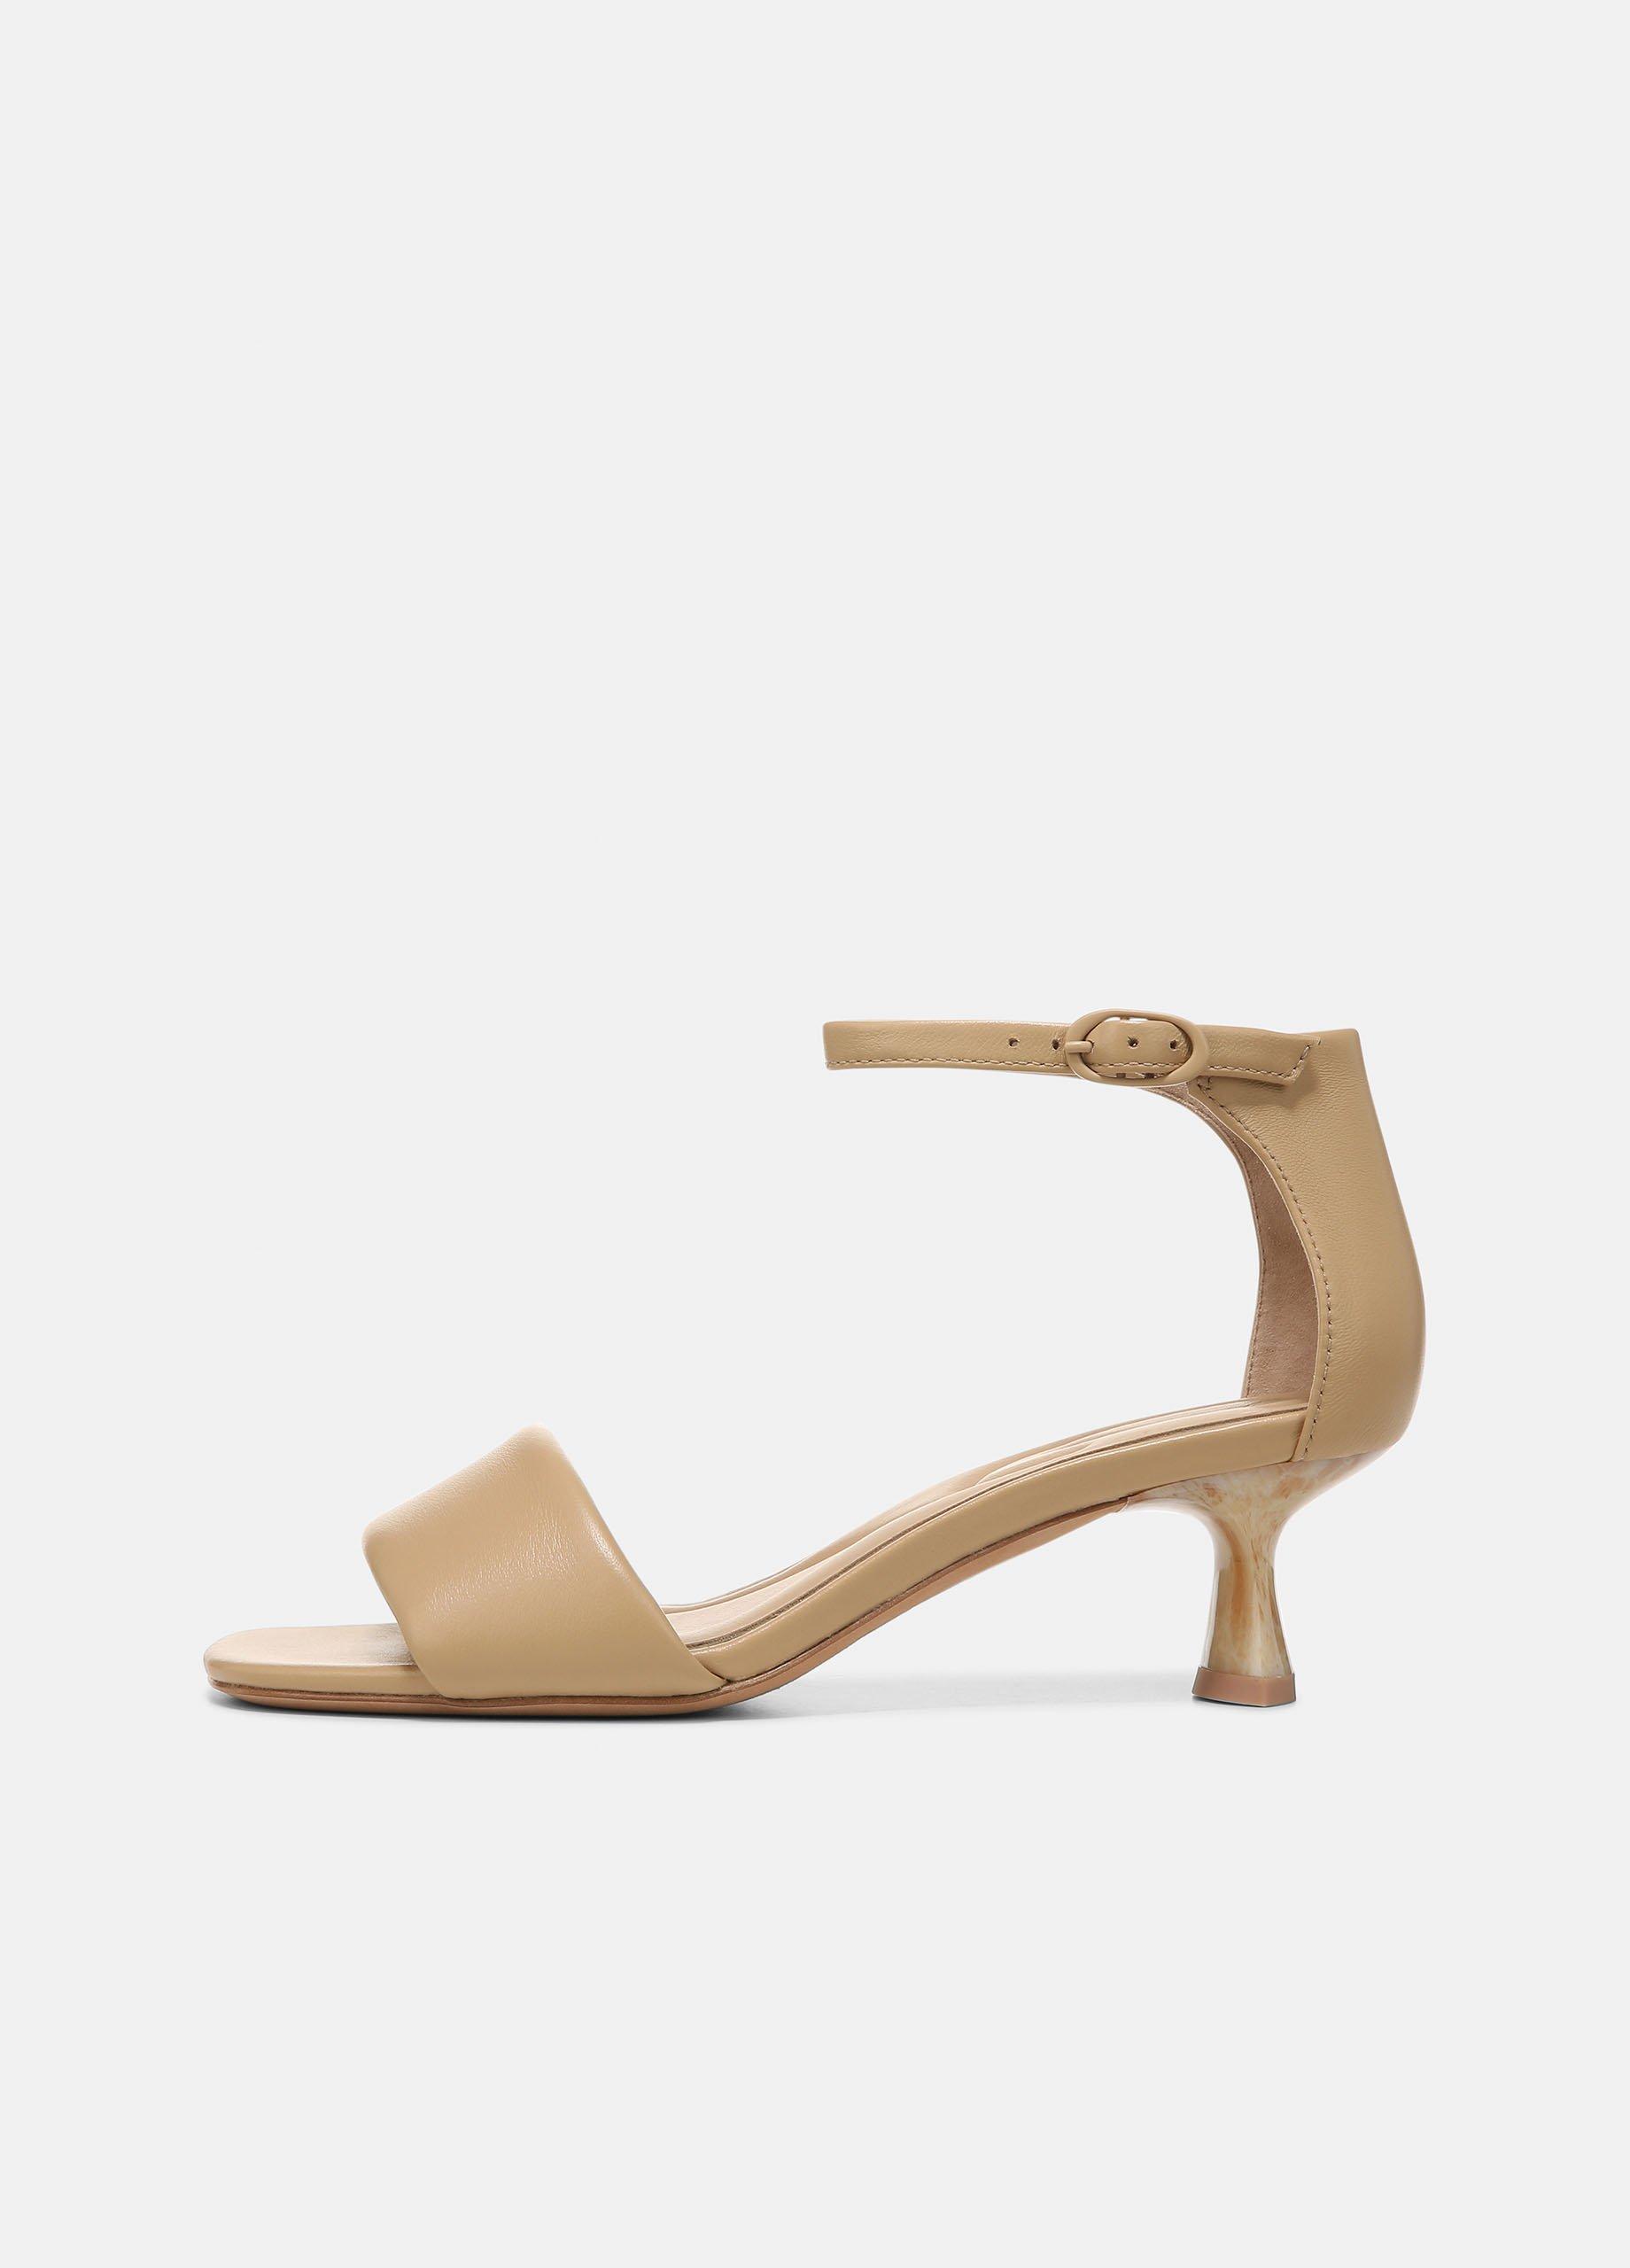 Pepa Leather Heeled Sandal in Shoes | Vince